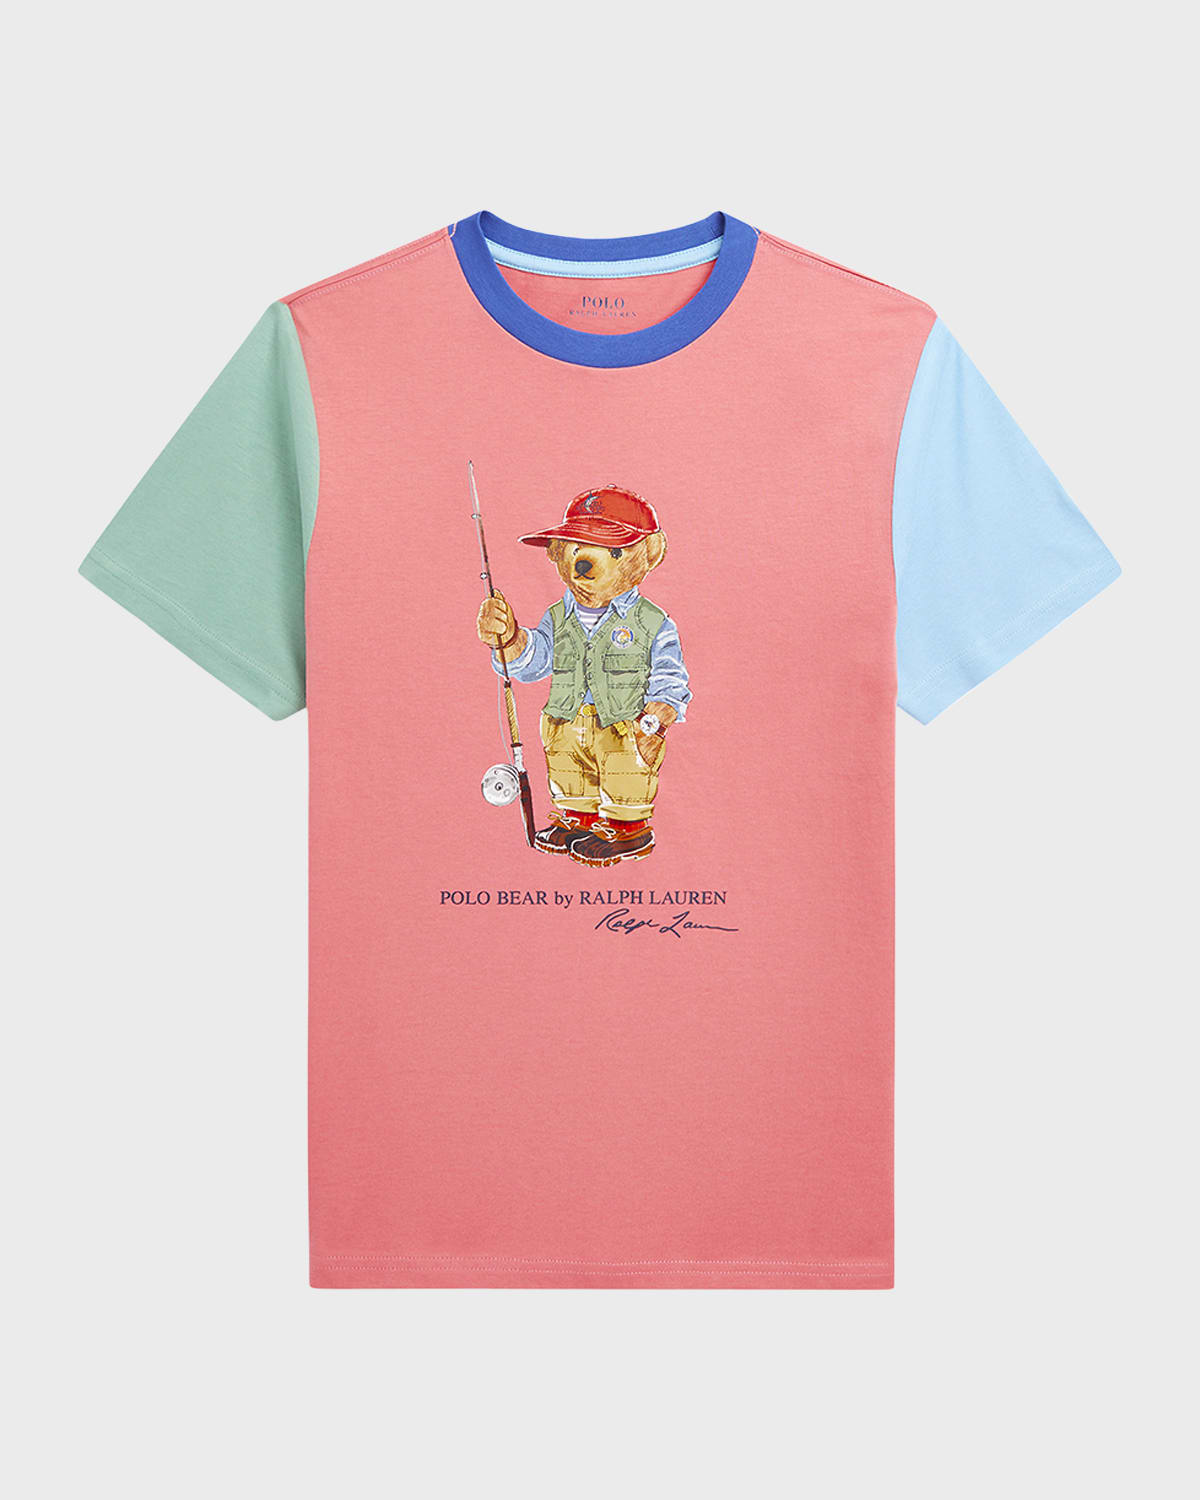 Boy's Color Blocked Graphic Polo Bear Jersey T-Shirt, Size S-XL